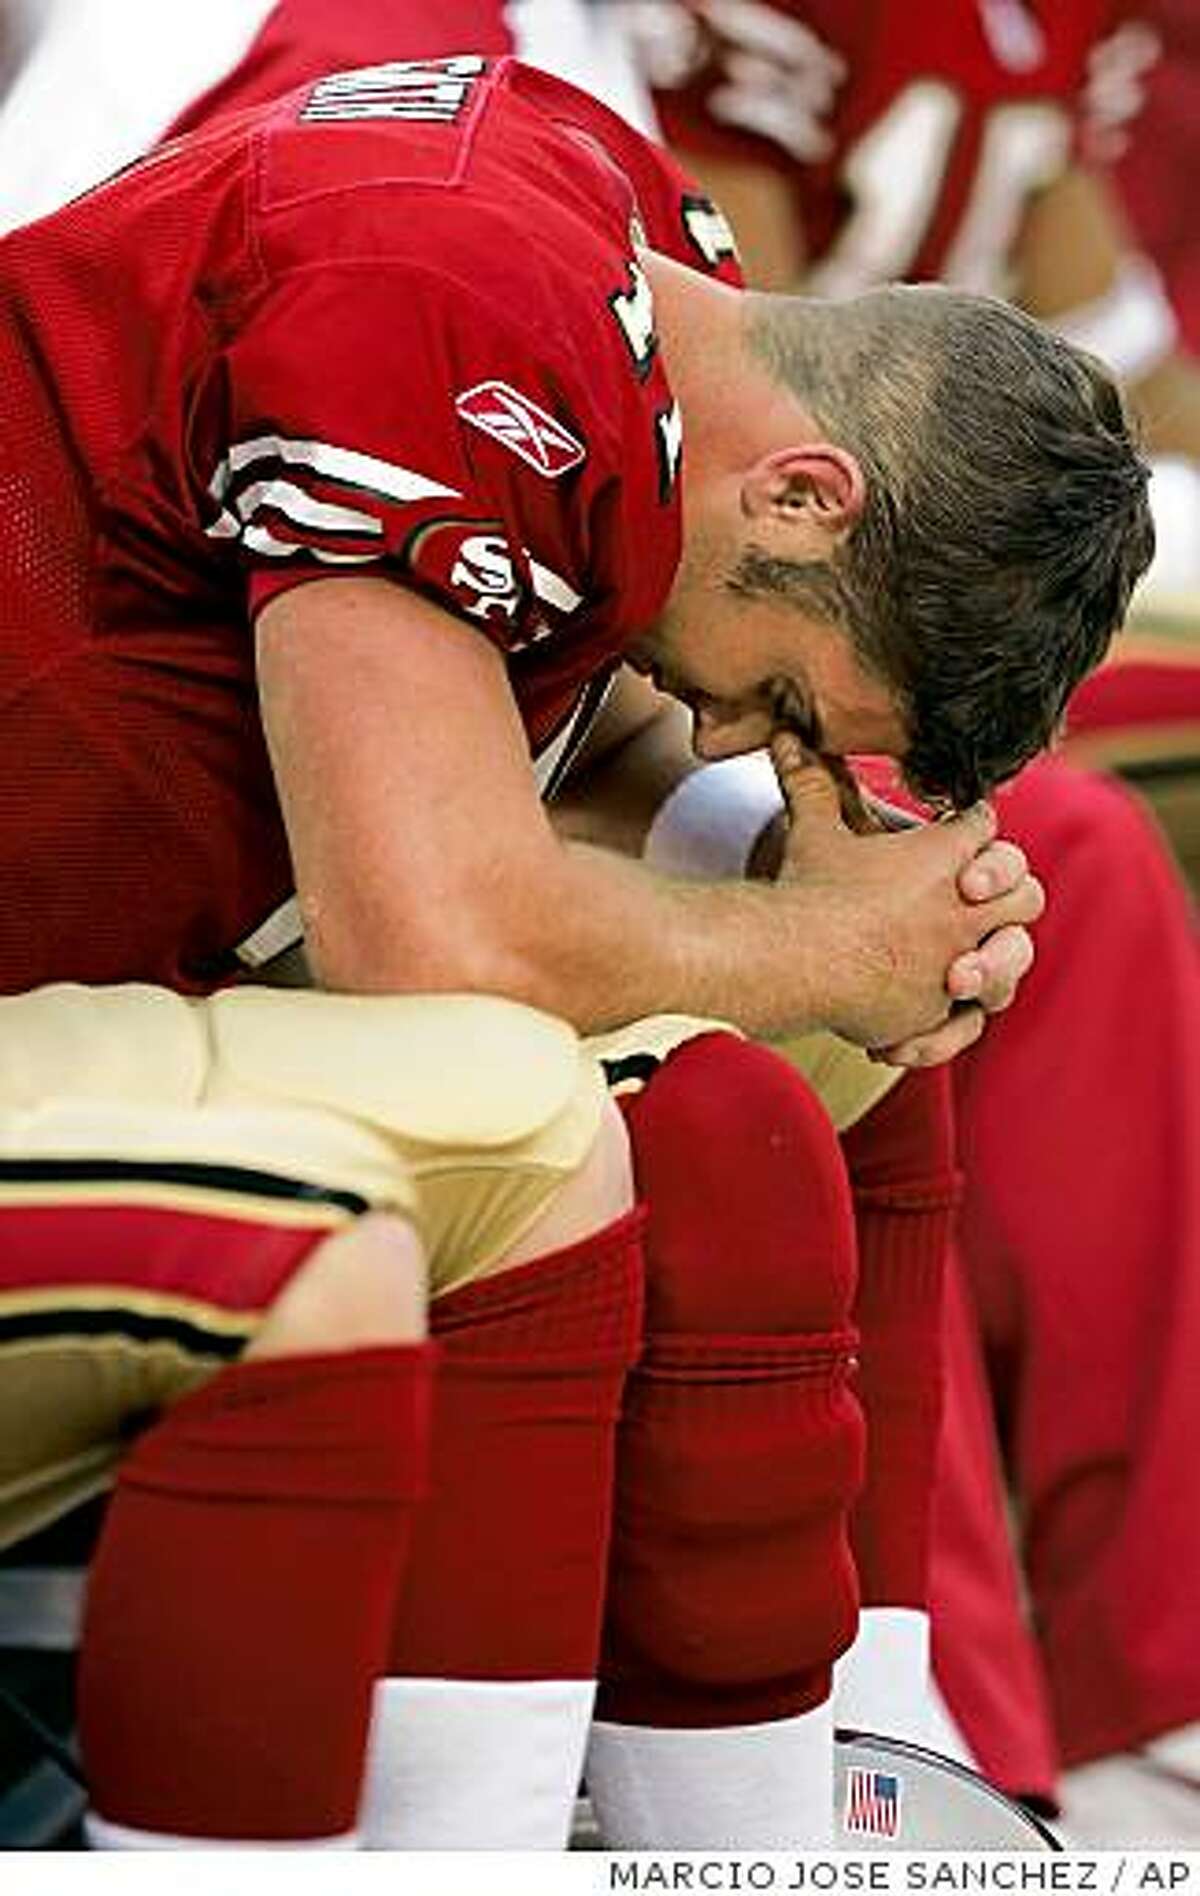 San Francisco 49ers quarterback Alex Smith lowers his head on the sideline in the closing seconds of the 49ers' 17-10 loss to the Arizona Cardinals on Sunday, Dec. 4, 2005, in San Francisco. (AP Photo/Marcio Jose Sanchez)